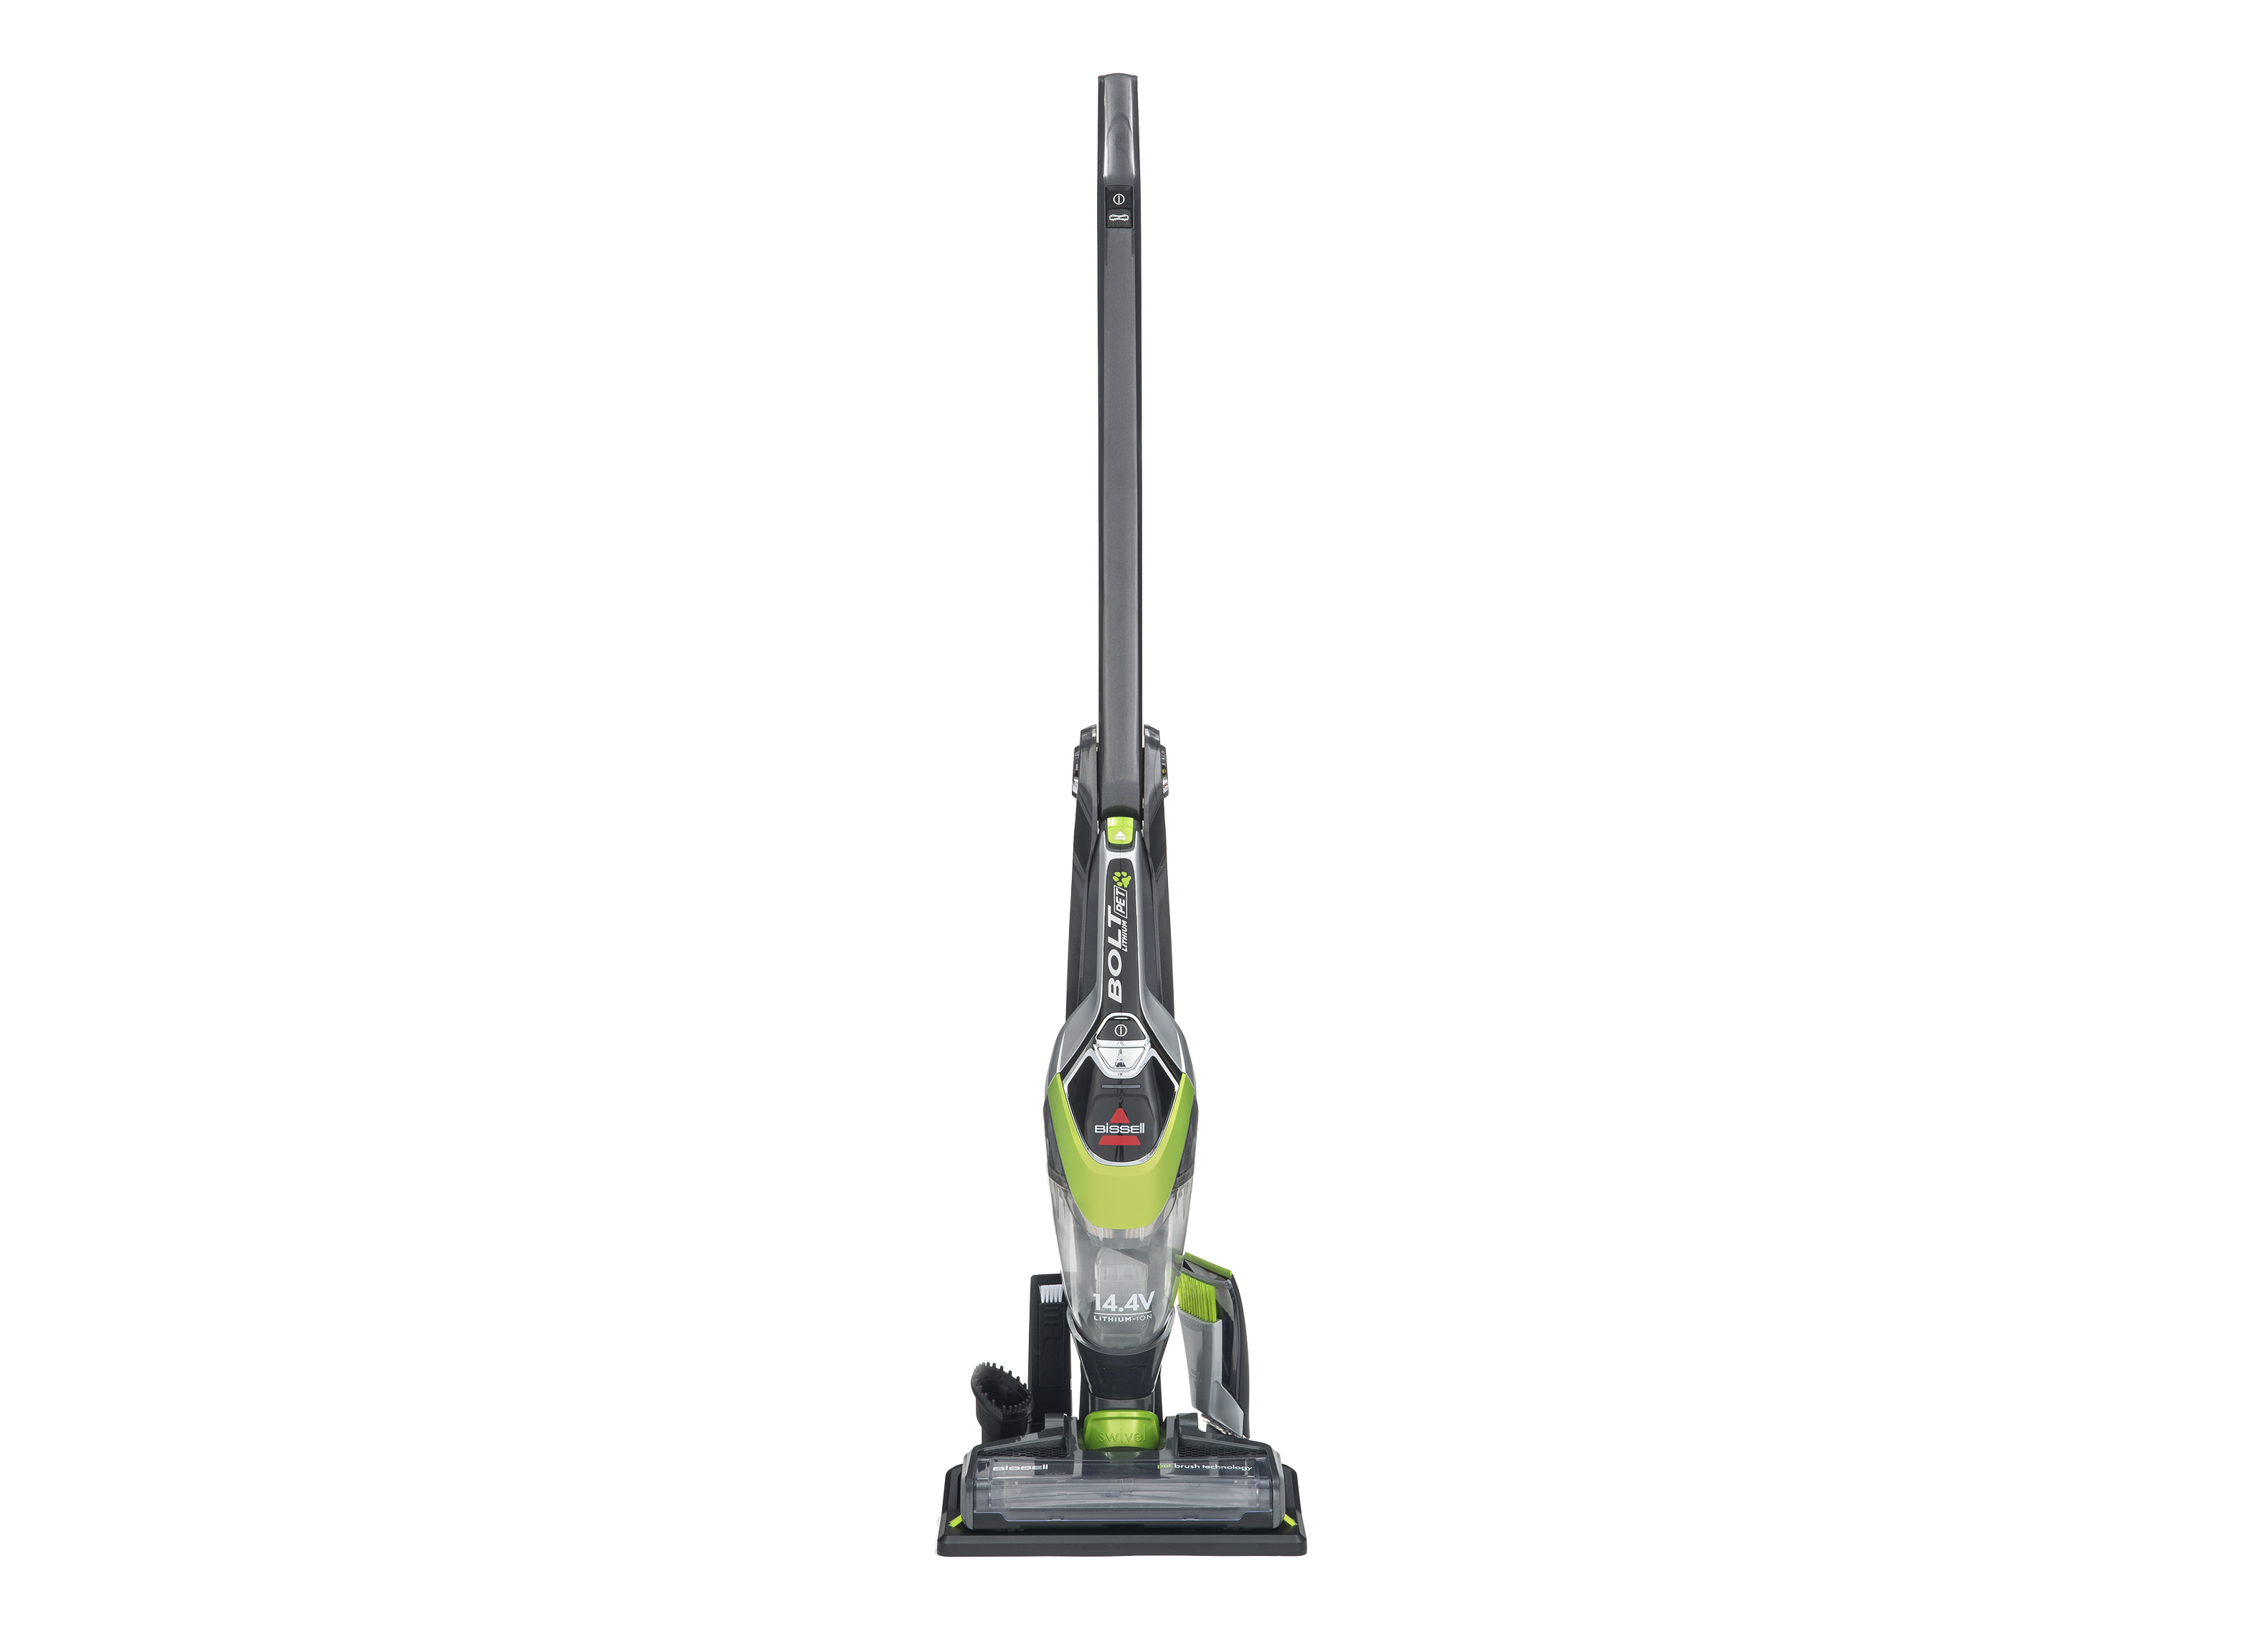 https://crdms.images.consumerreports.org/prod/products/cr/models/387587-stickvacuums-bissell-bolt1954.png